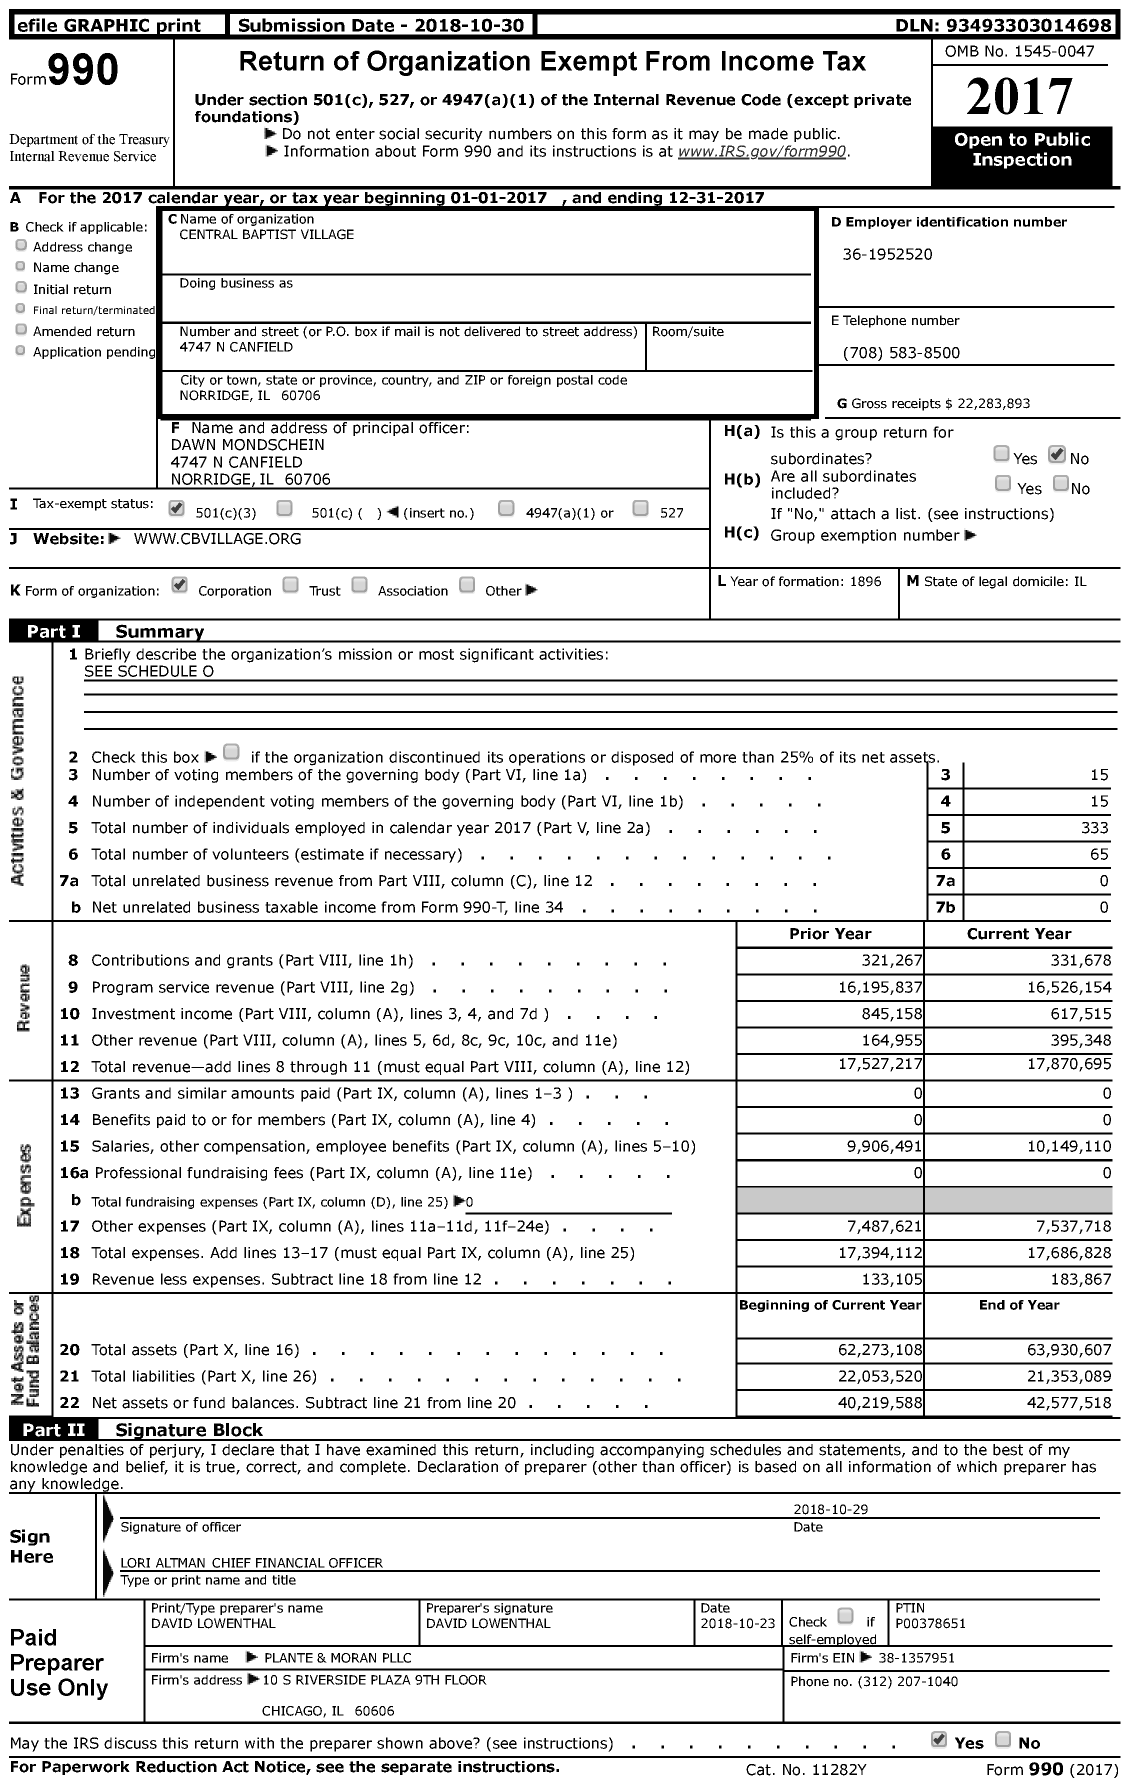 Image of first page of 2017 Form 990 for Central Baptist Village (CBV)